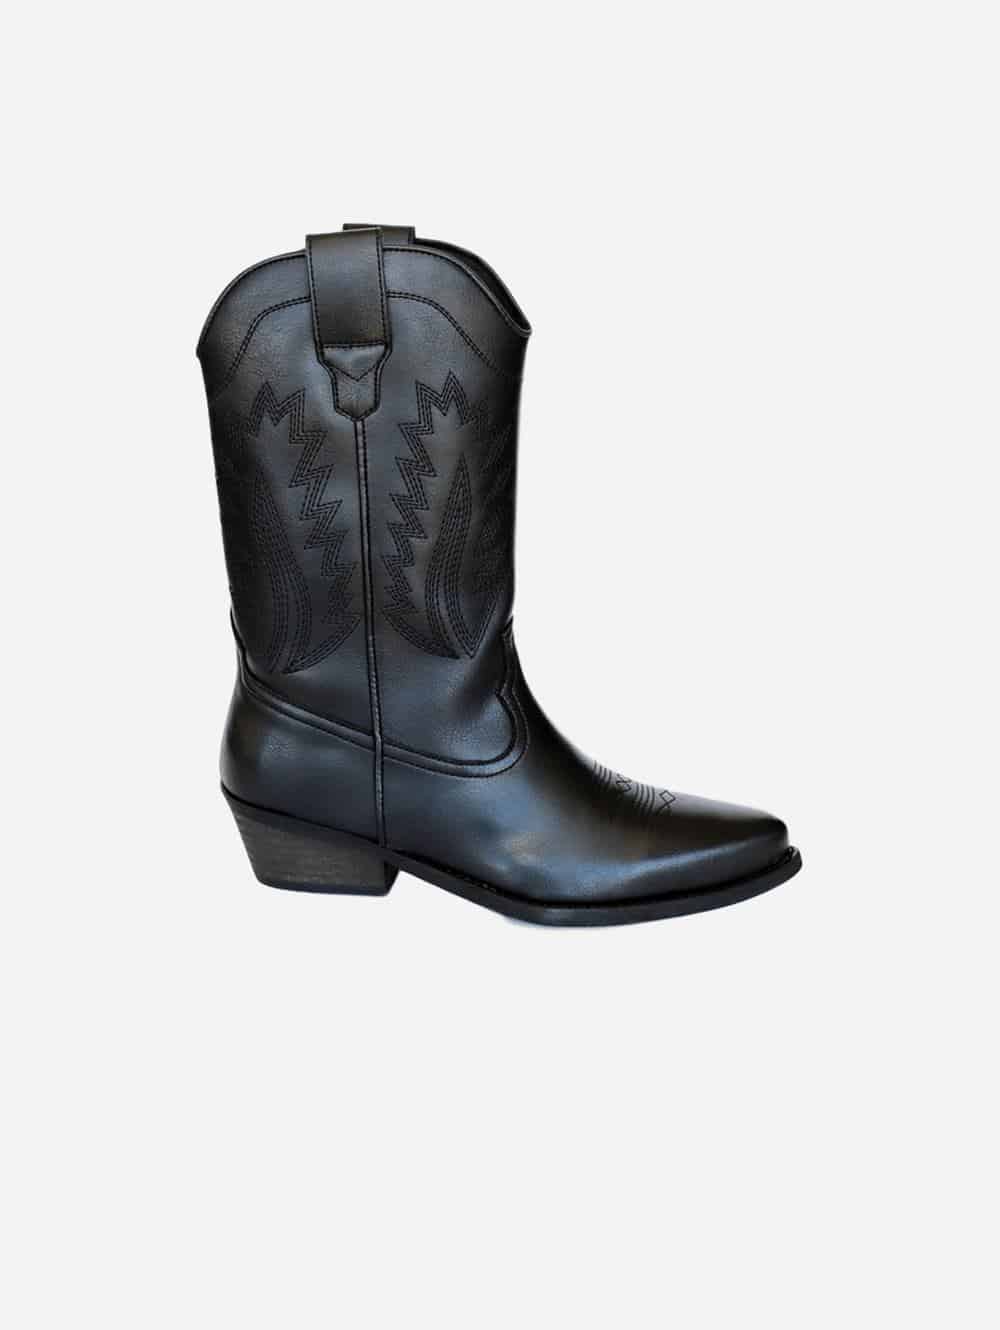 Black high top vegan leather cowboy boots with flame design